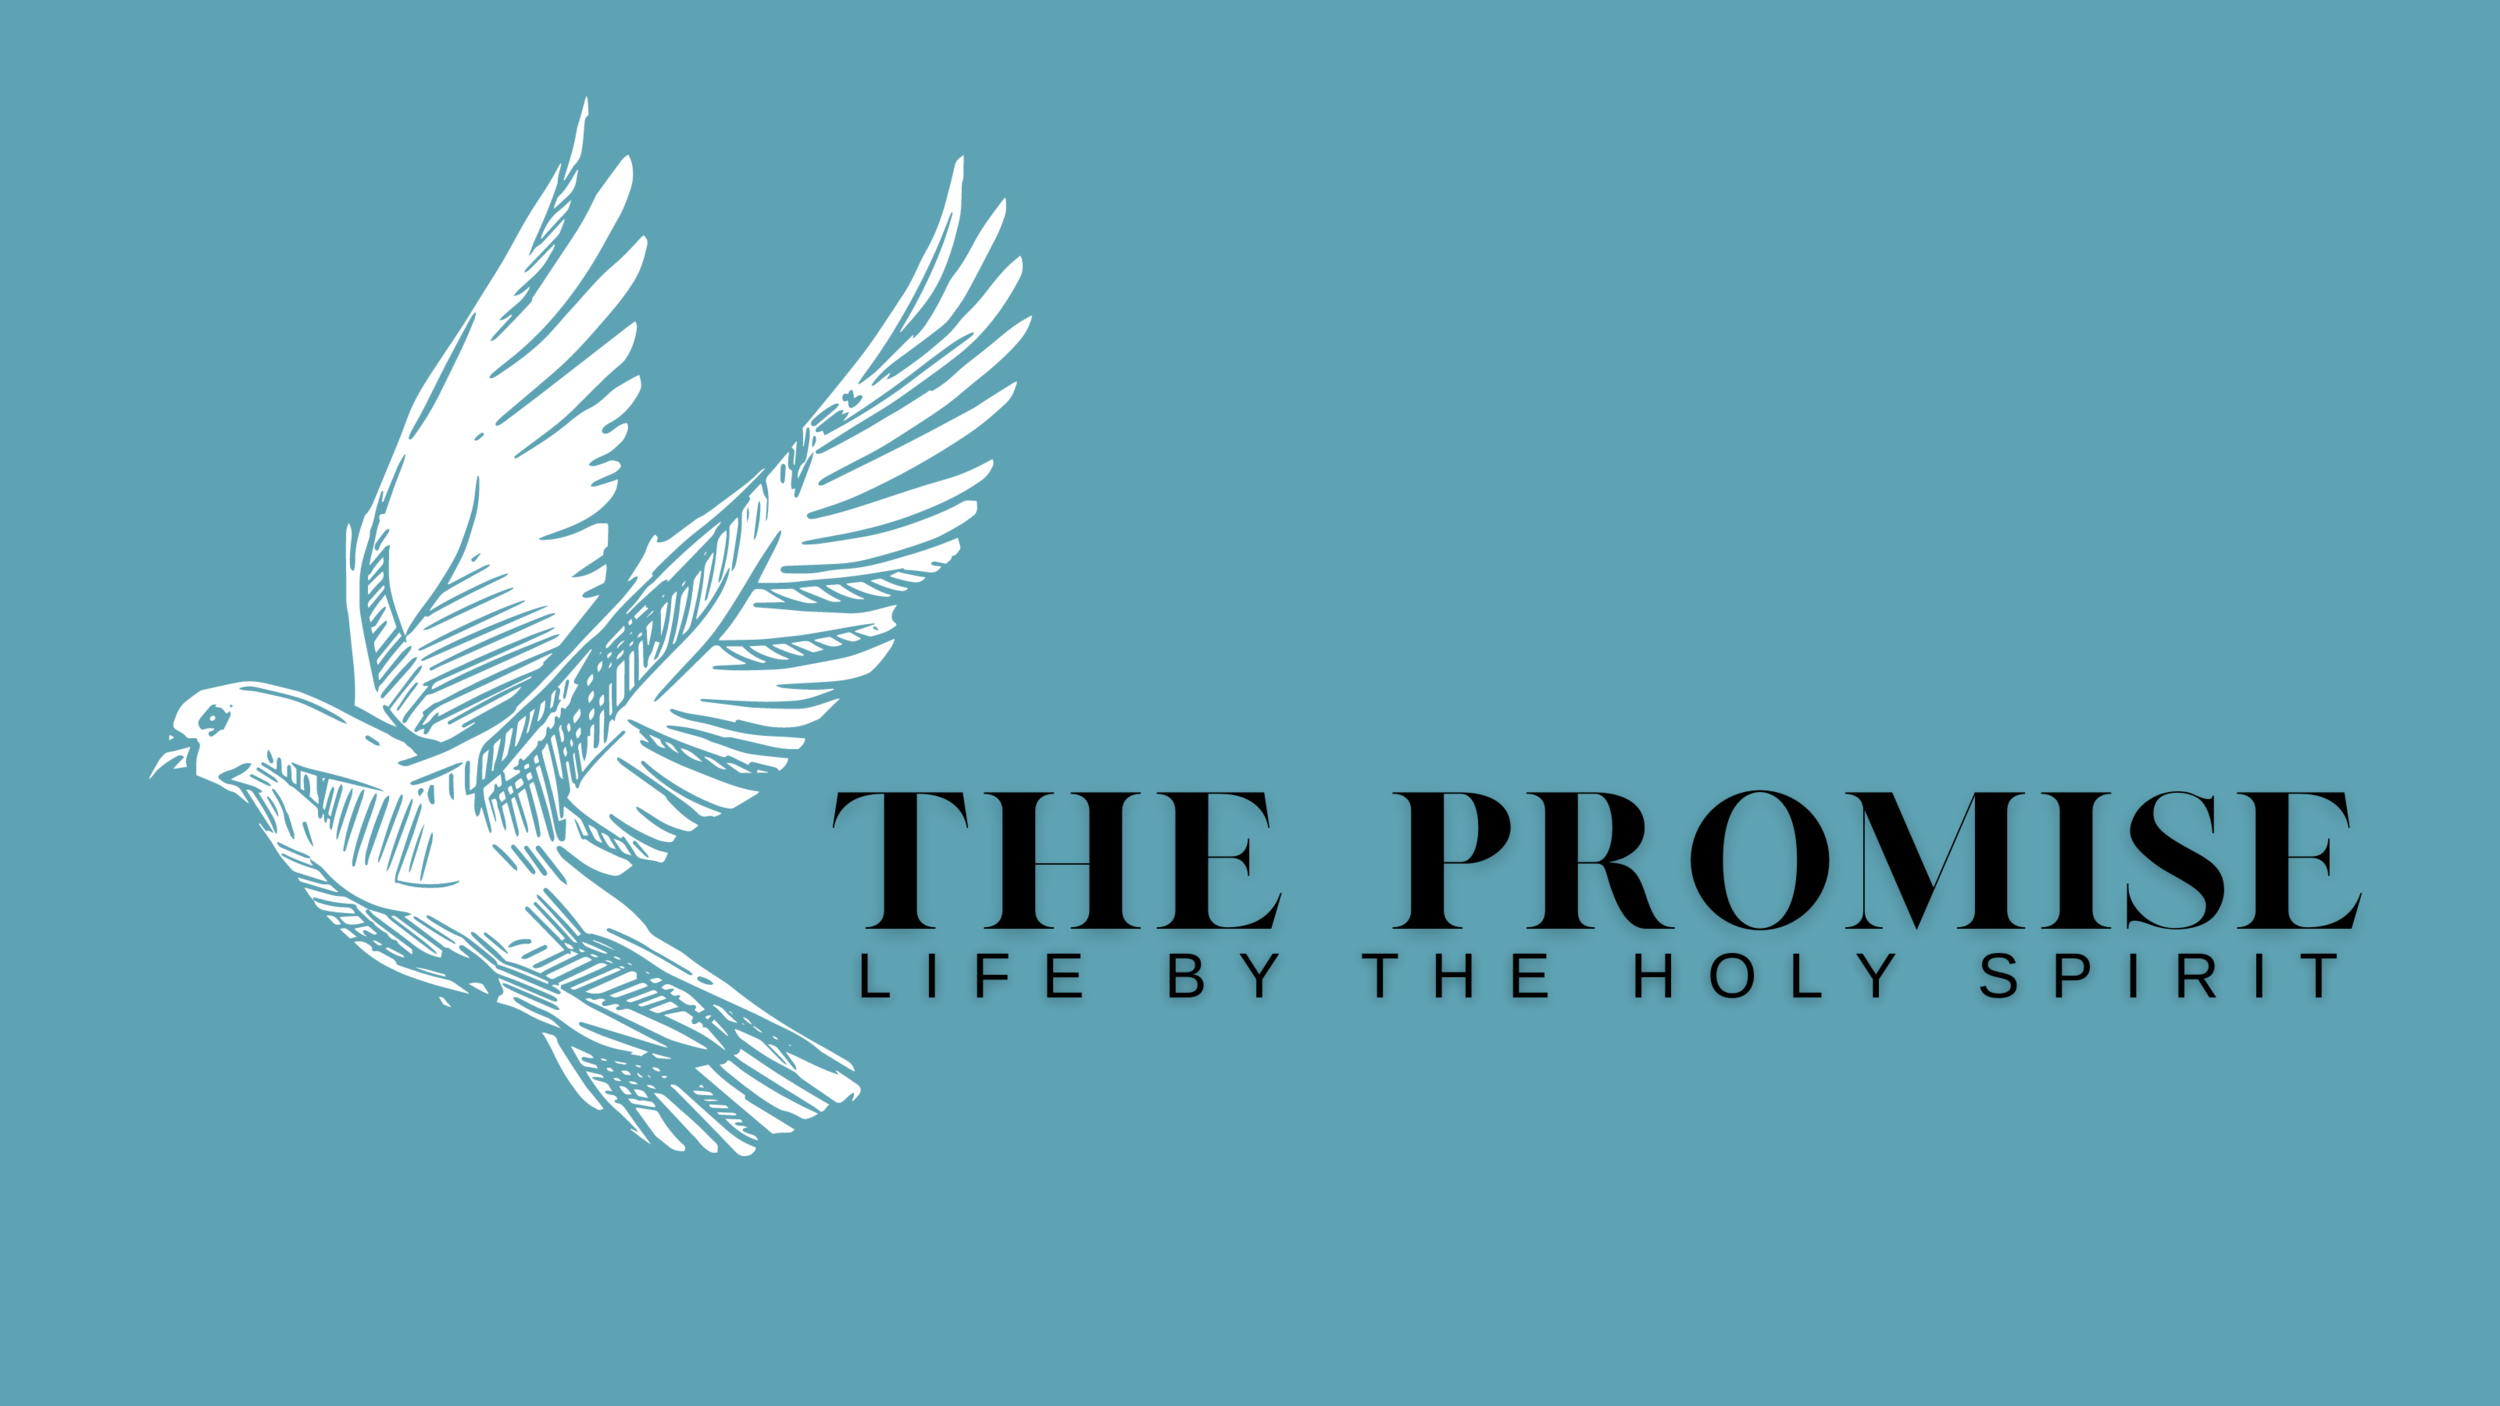 Copy of The Promise - Life by the Holy Spirit.png